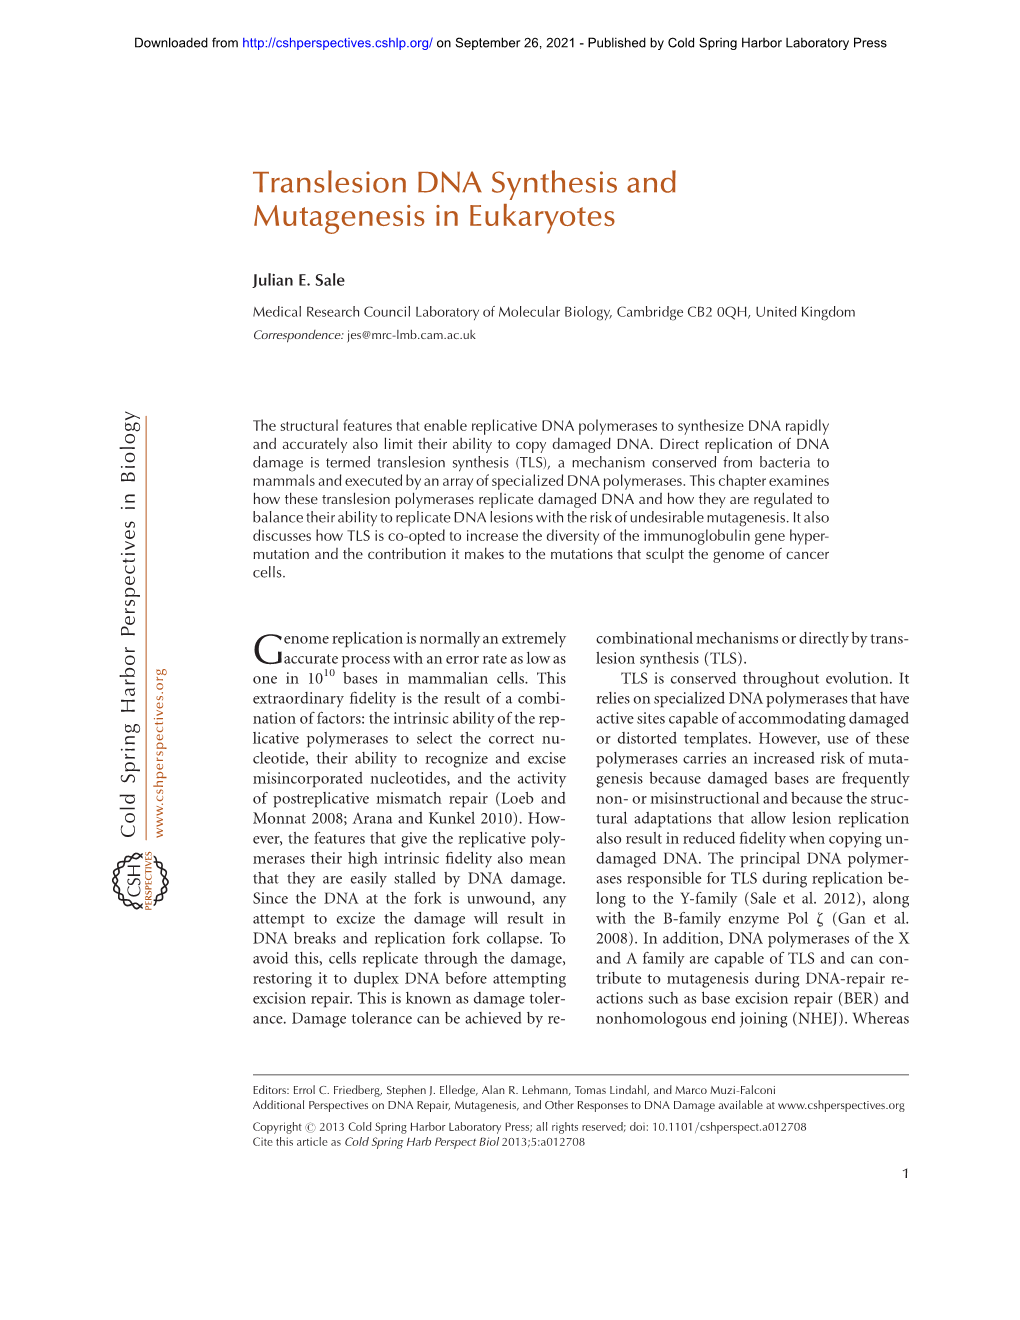 Translesion DNA Synthesis and Mutagenesis in Eukaryotes